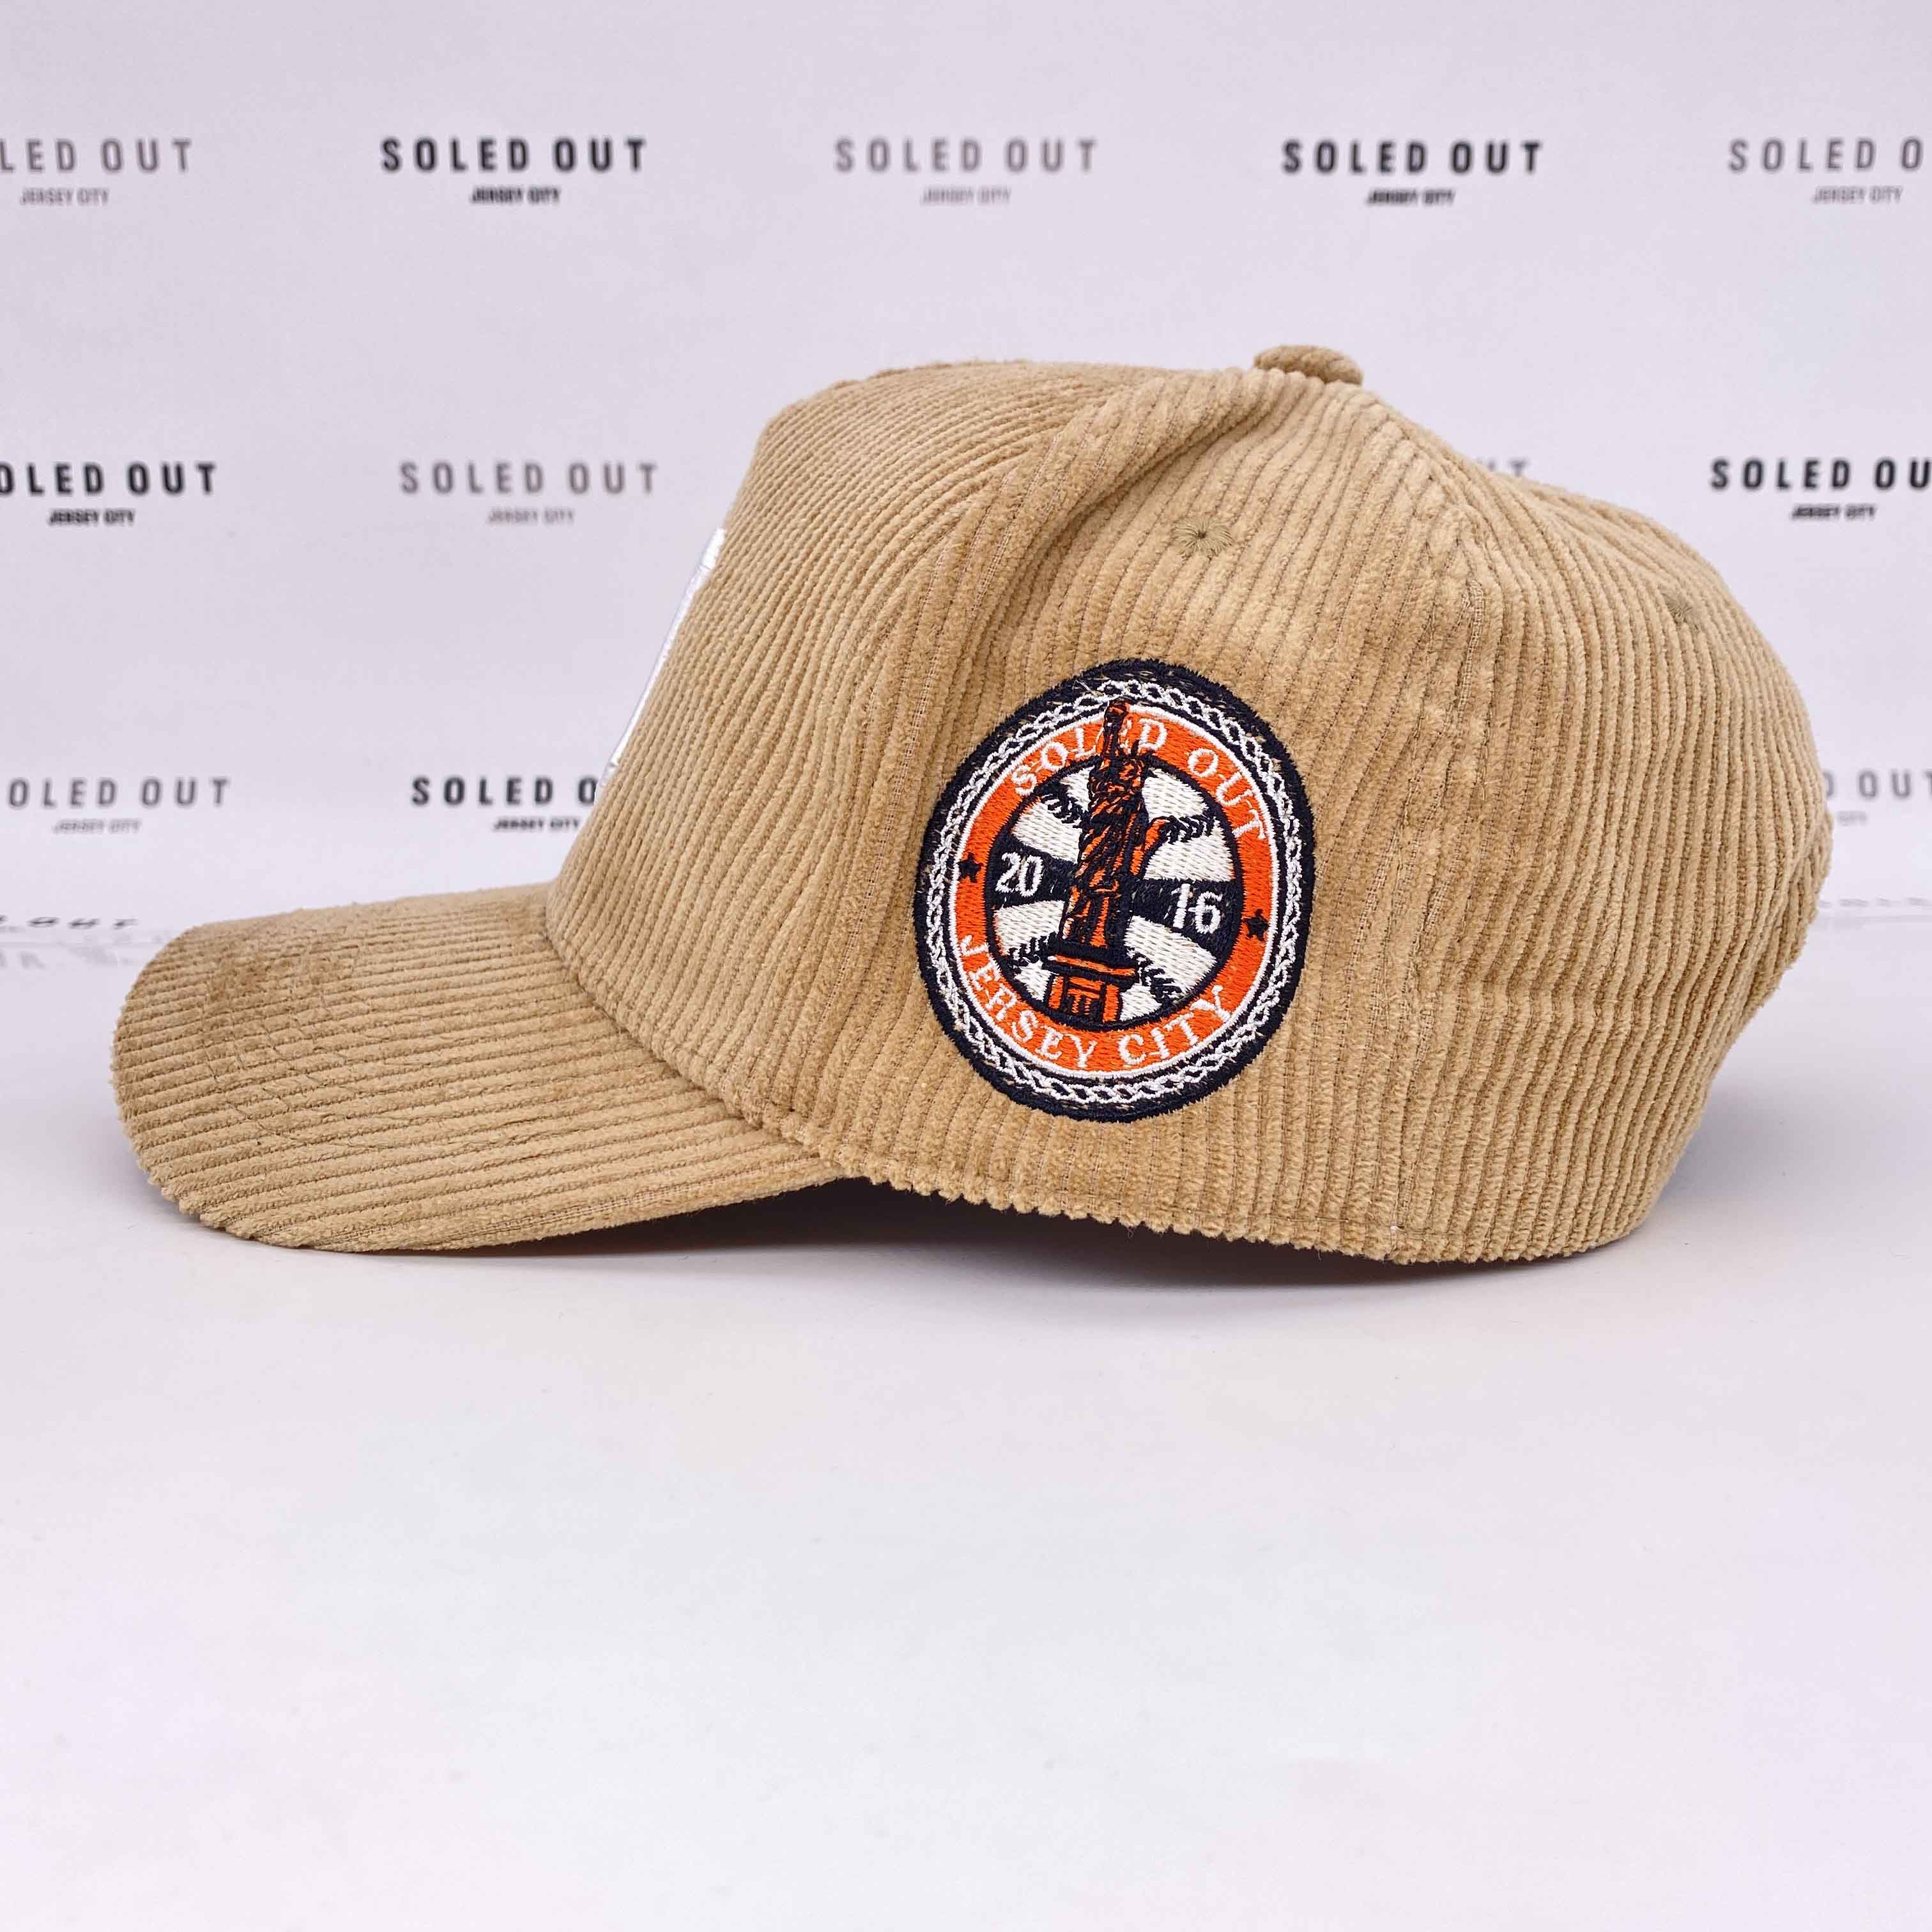 Soled Out Snapback "CORDUROY TAUPE" 2022 New Size OS